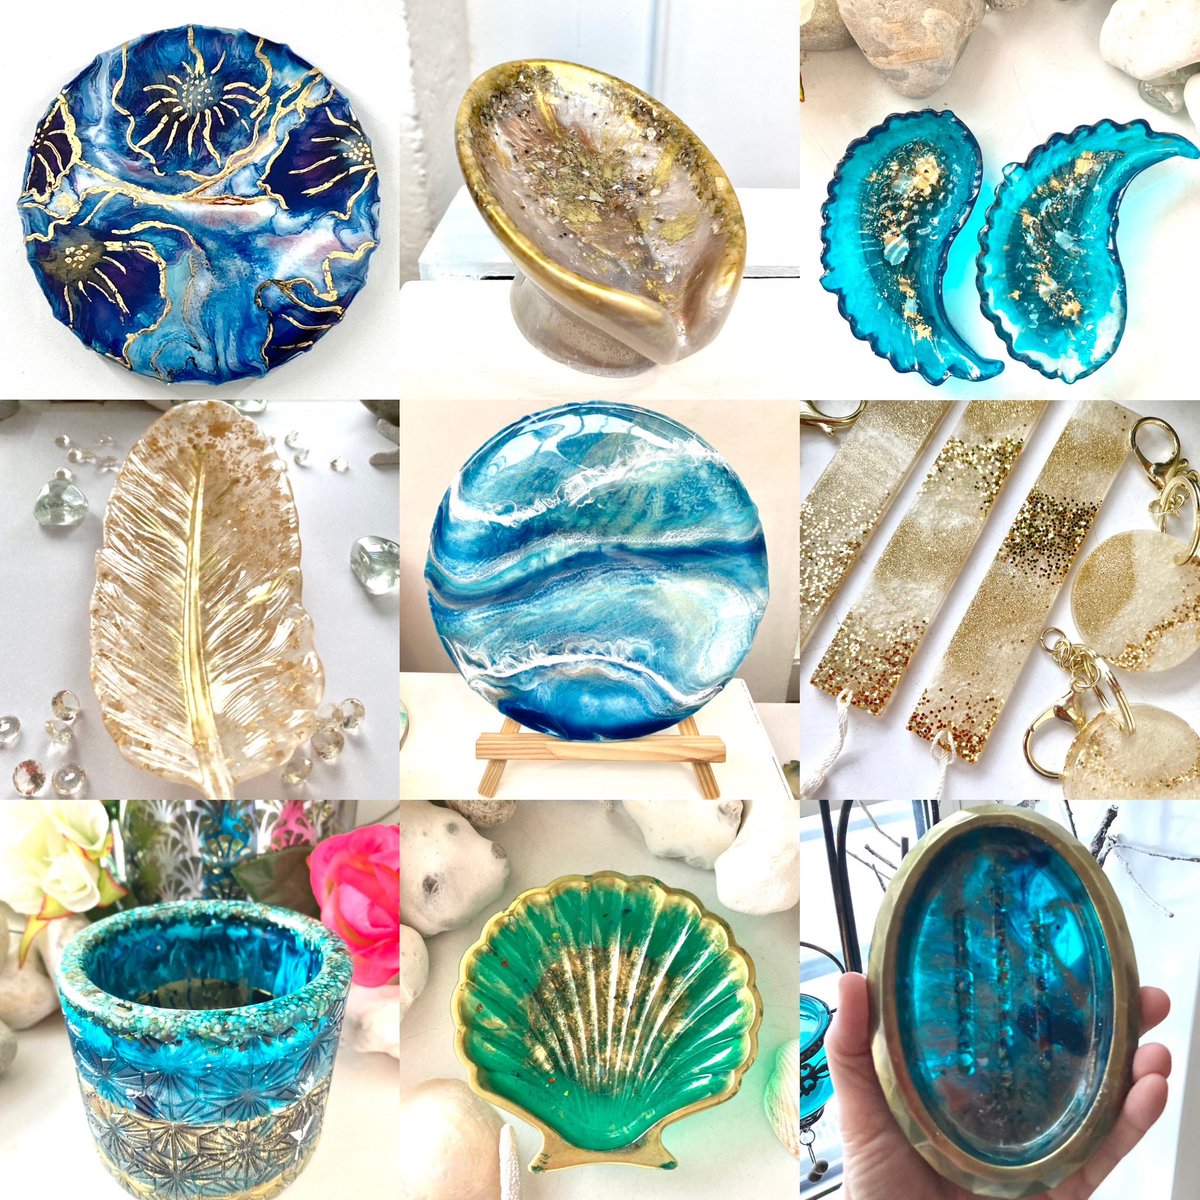 Morning, lots of New resin items, that are perfect gifts for #valentines & #MothersDay. Plus there is a SALE of up to 30% off in the shop too: etsy.me/3e14vIm #UKGiftHour #UKGiftAM #shopindie #onthisdaygifts #onlinecrafts #mhhsbd #ukgiftpowerhour